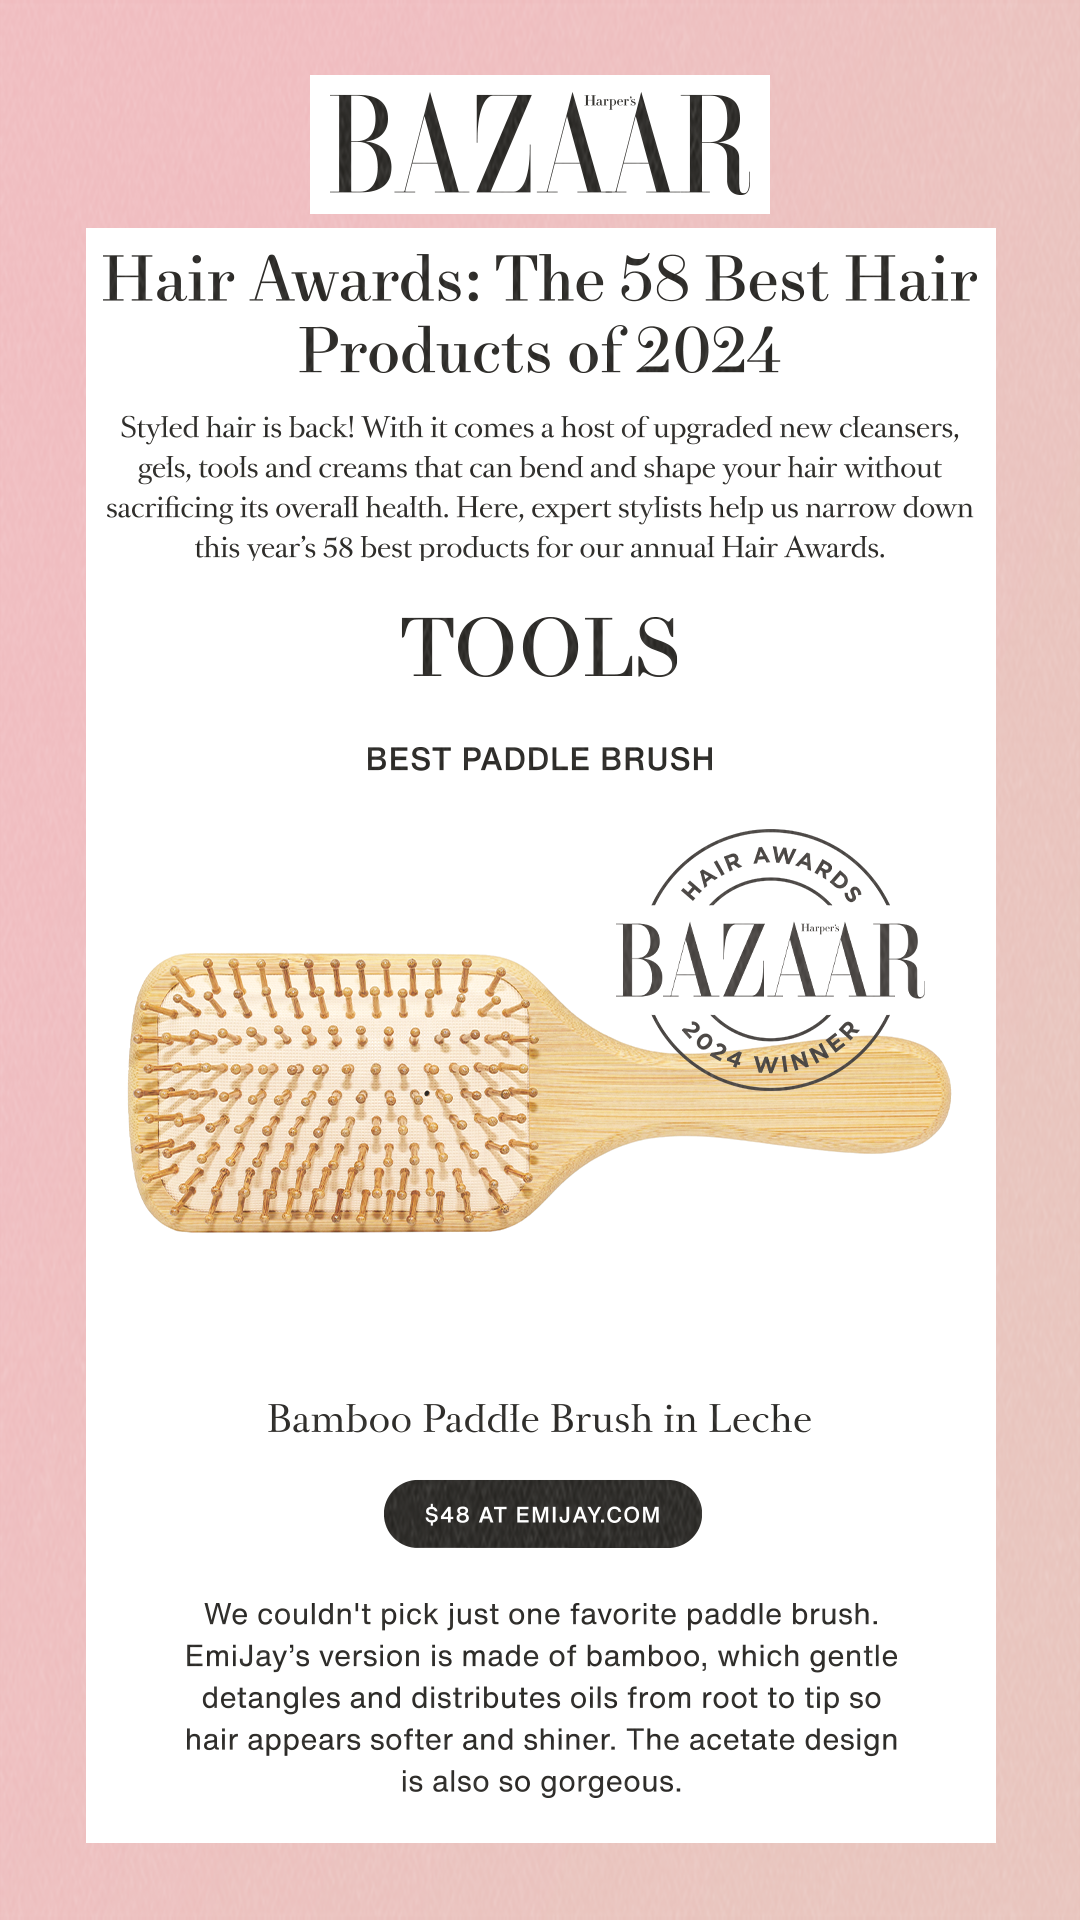 Hair Awards: The 58 Best Hair Products of 2024Styled hair is back! With it comes a host of upgraded new cleansers, gels, tools and creams that can bend and shape your hair without sacrificing its overall health. Here, expert stylists help us narrow down this year’s 58 best products for our annual Hair Awards.TOOLSBEST PADDLE BRUSH Bamboo Paddle Brush in Leche$48 at emijay.comWe couldn't pick just one favorite paddle brush. EmiJay’s version is made of bamboo, which gentle detangles and distributes oils from root to tip so hair appears softer and shiner. The acetate design is also so gorgeous.